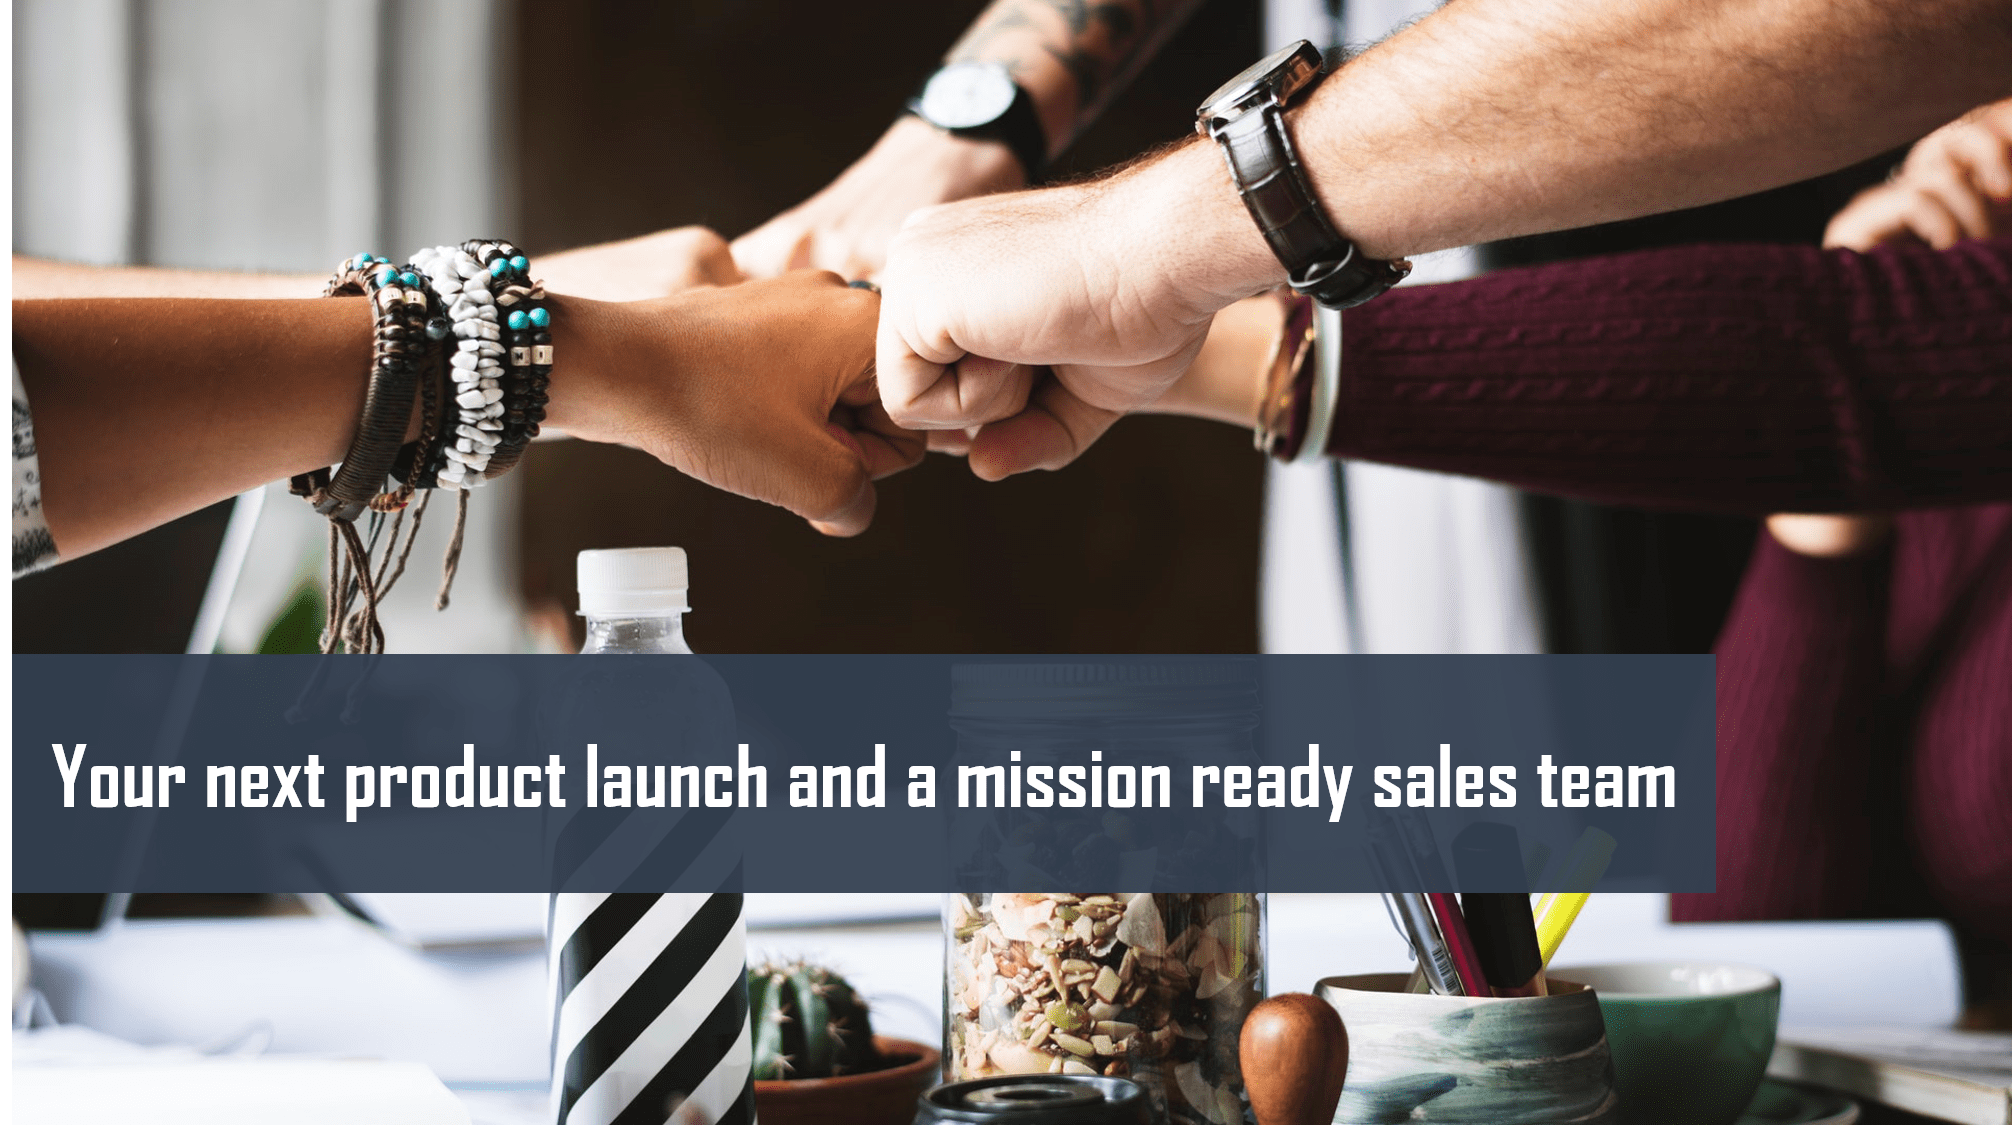 Your next product launch and a mission ready sales team